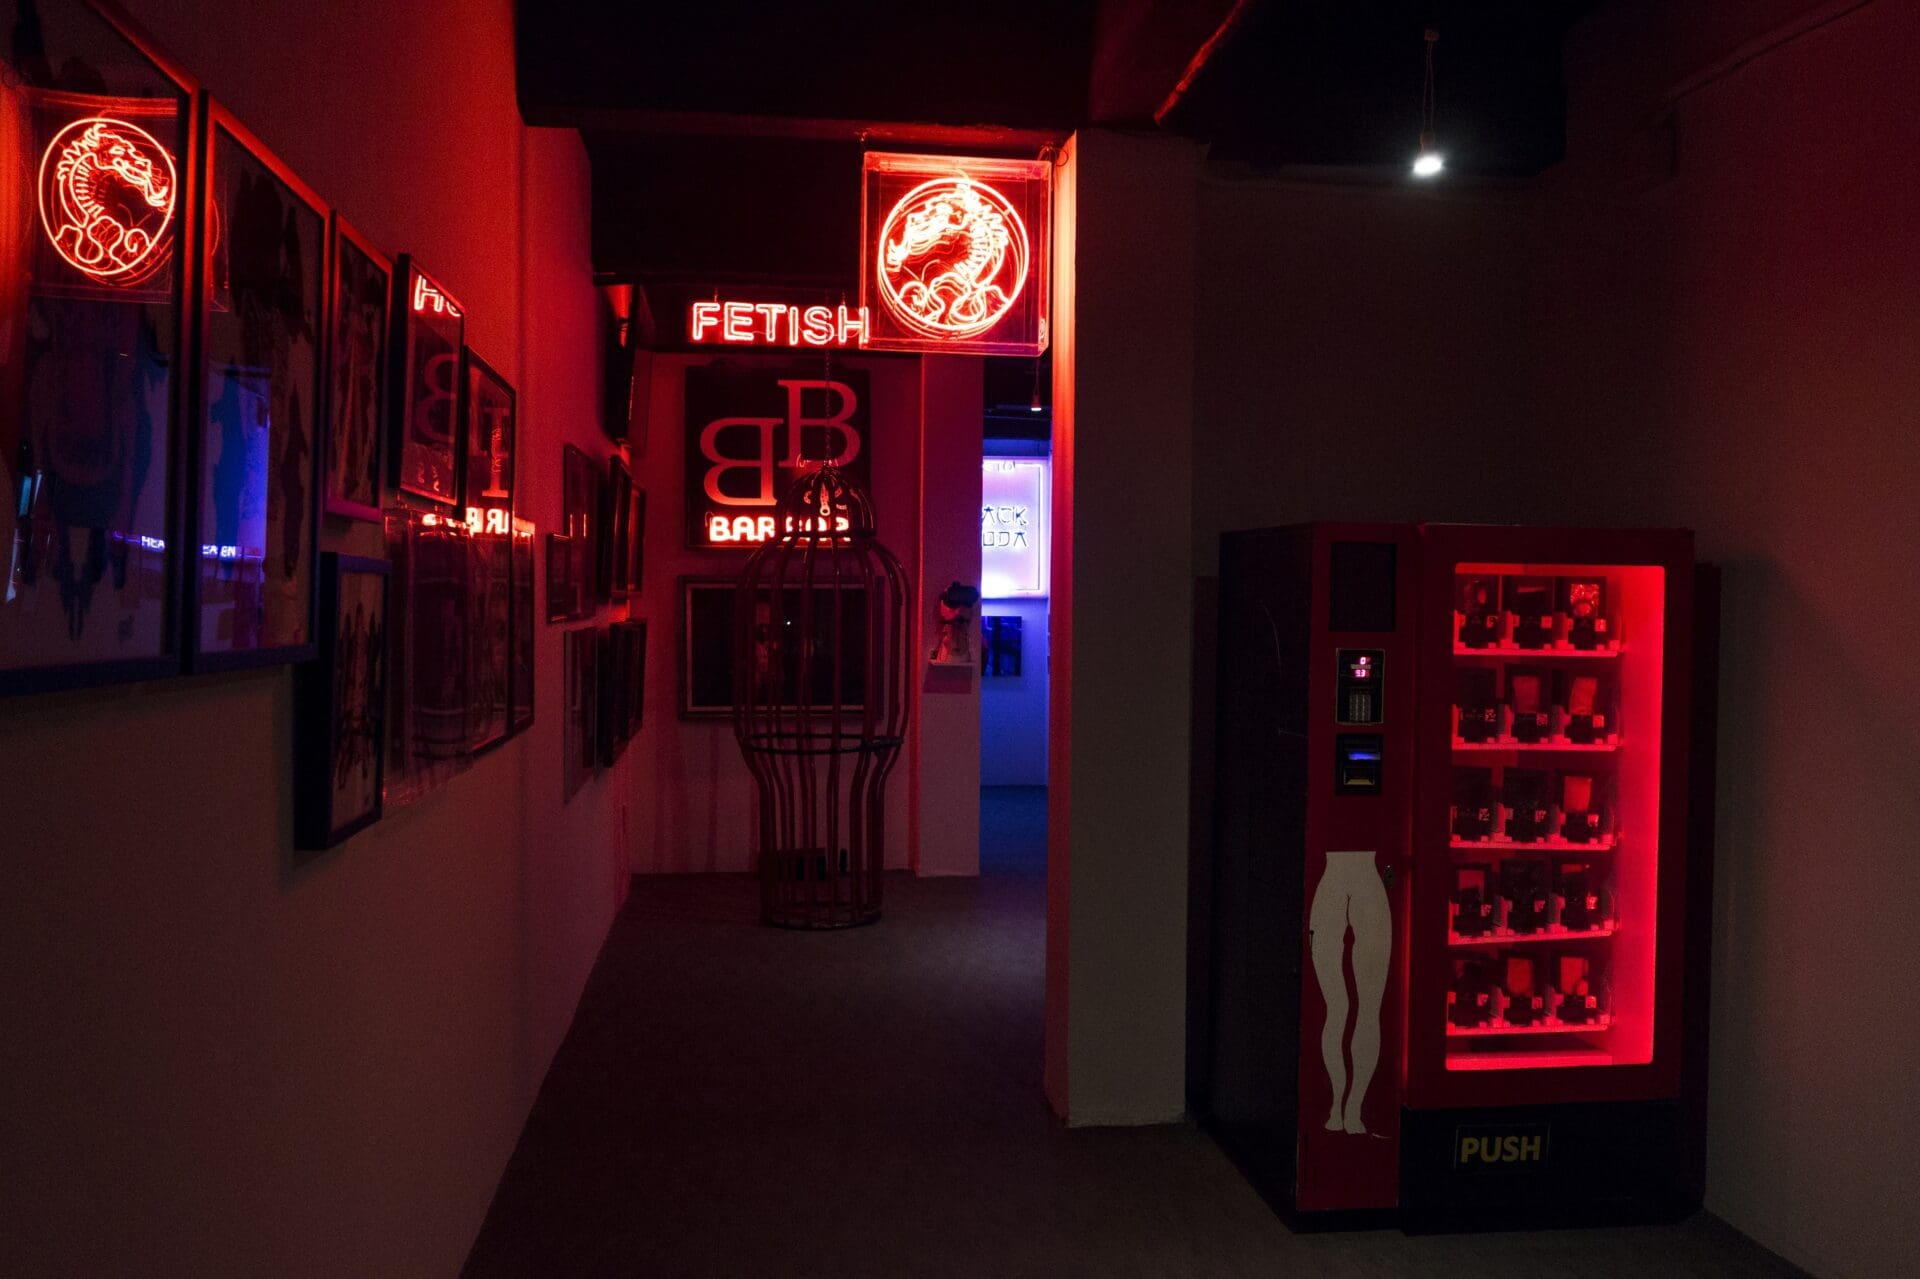 The best museums and galleries in Bangkok | a view inside Patpong Museum, with lots of shadows and red neon lighting. A neon dragon sign is visible, as is a vending machine, a cage, and the word FETISH.